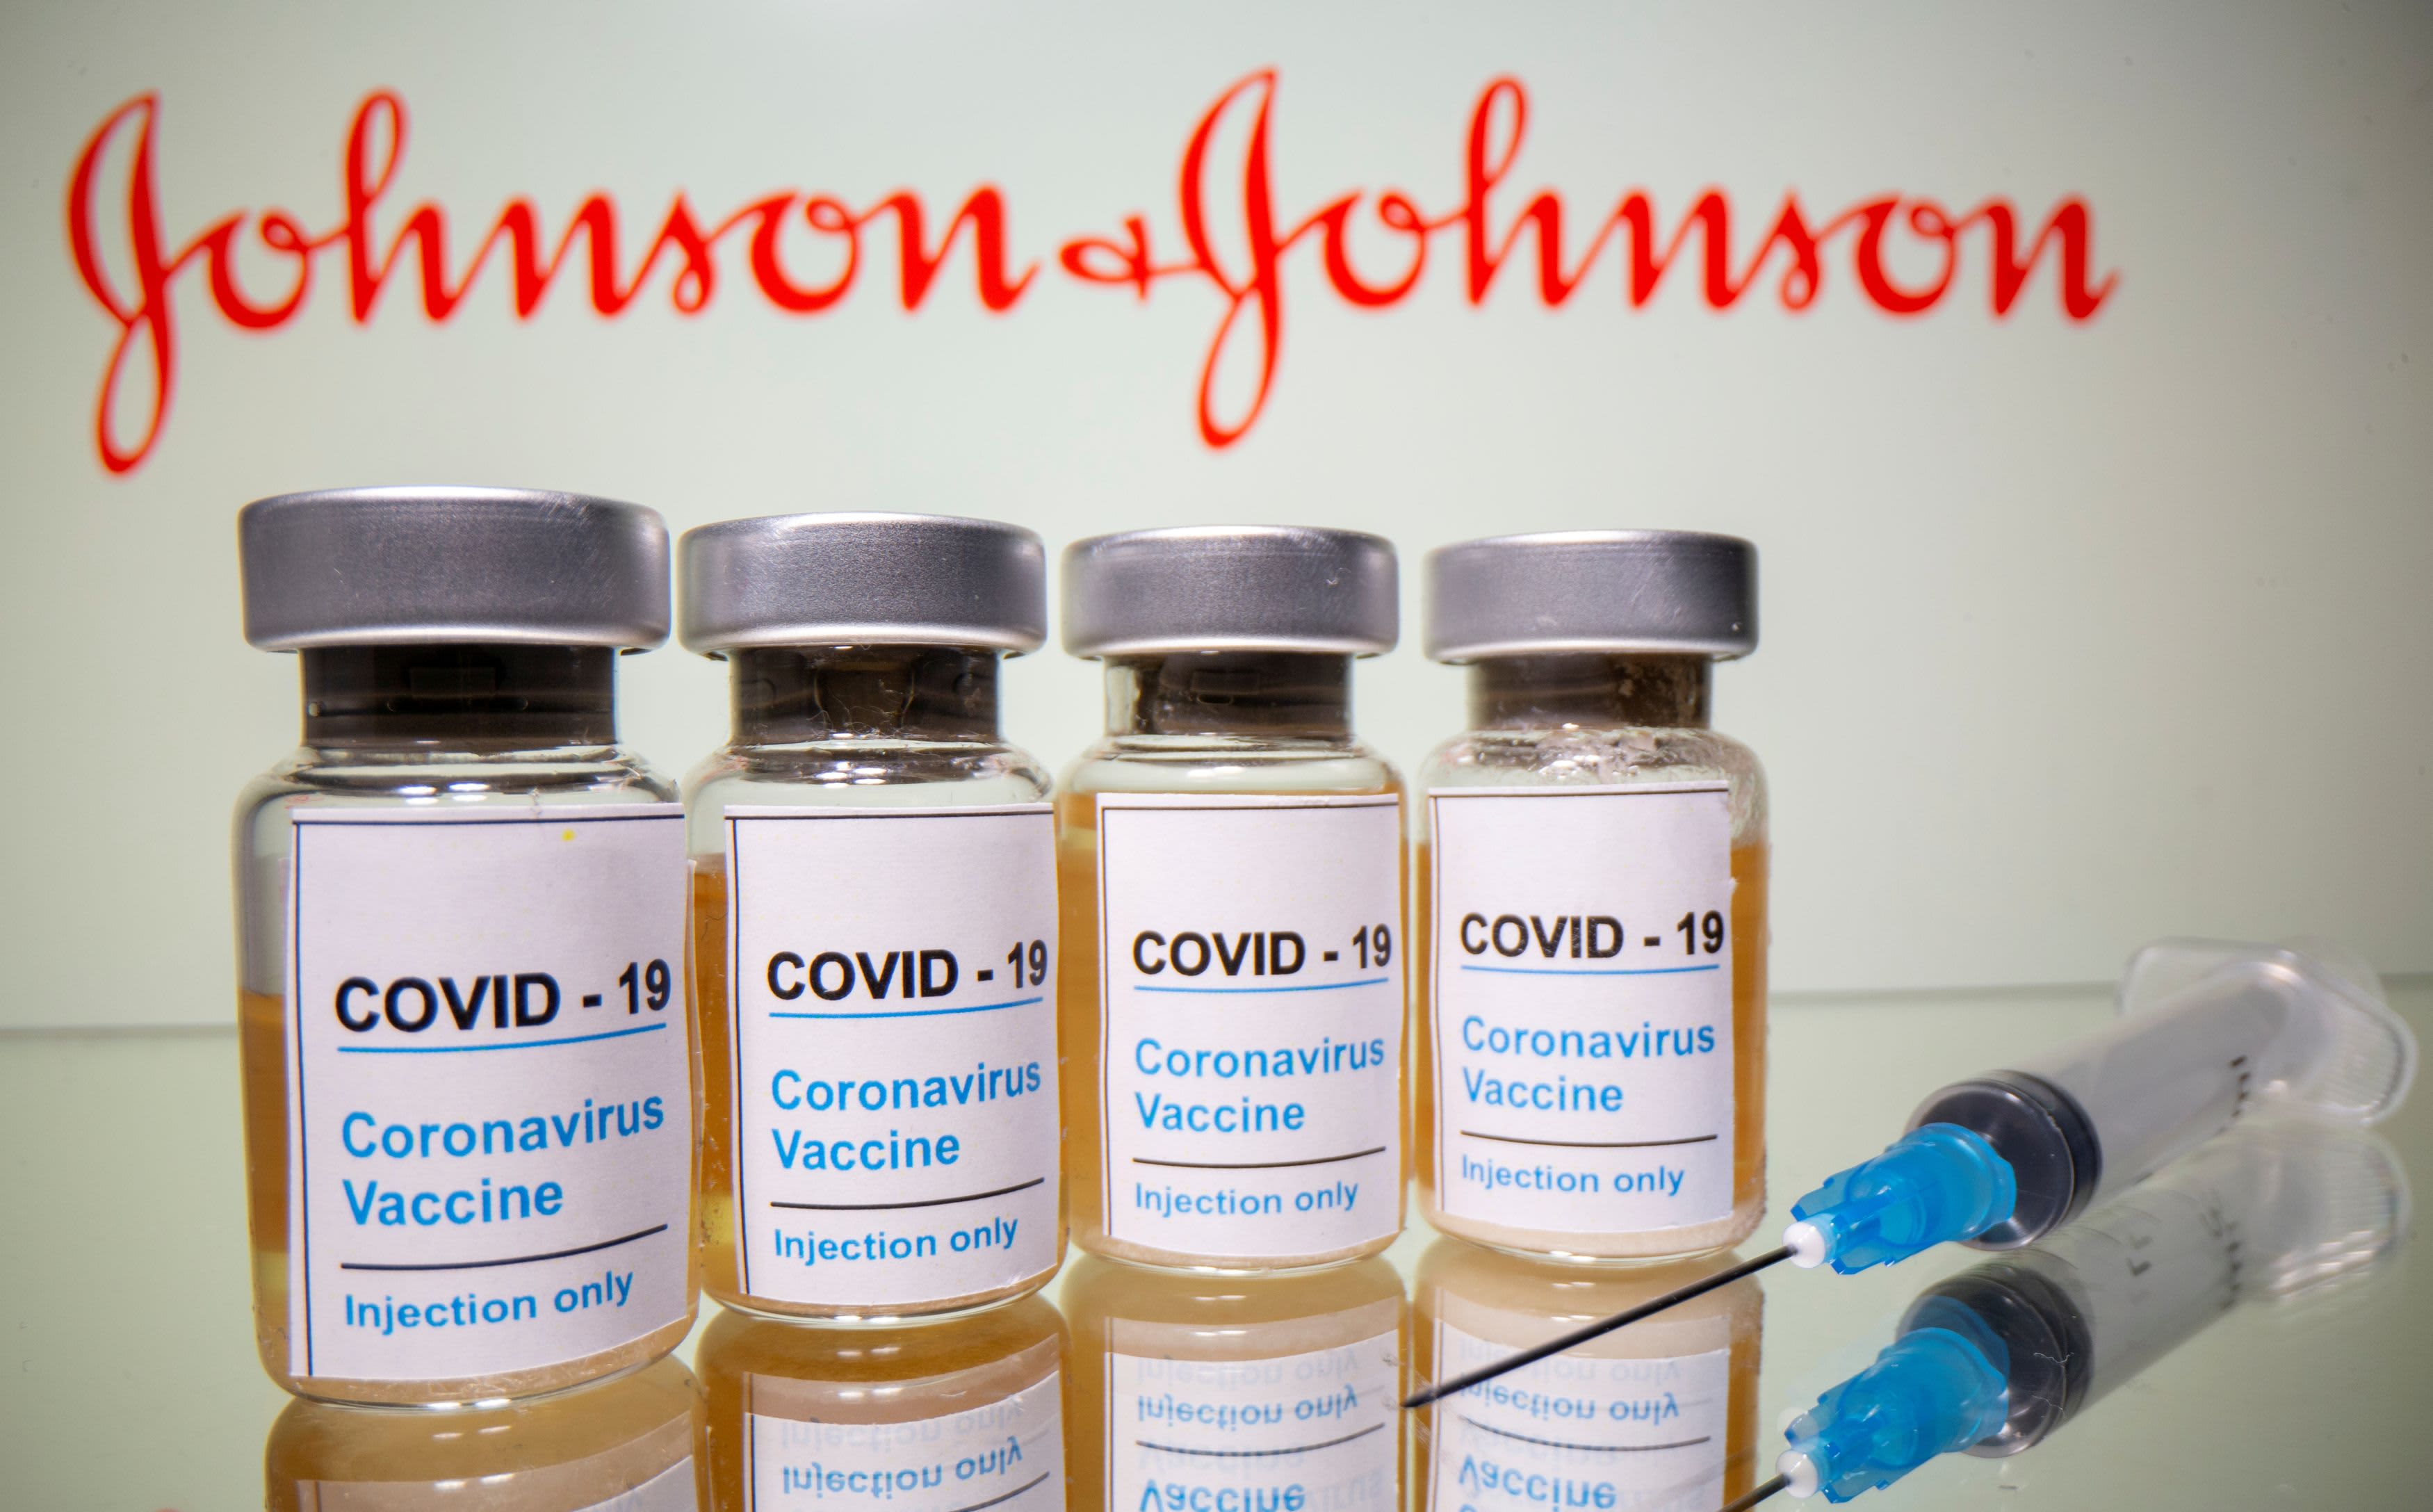 CDC panel recommends use of J&J's single-shot Covid vaccine, clearing way for distribution - CNBC